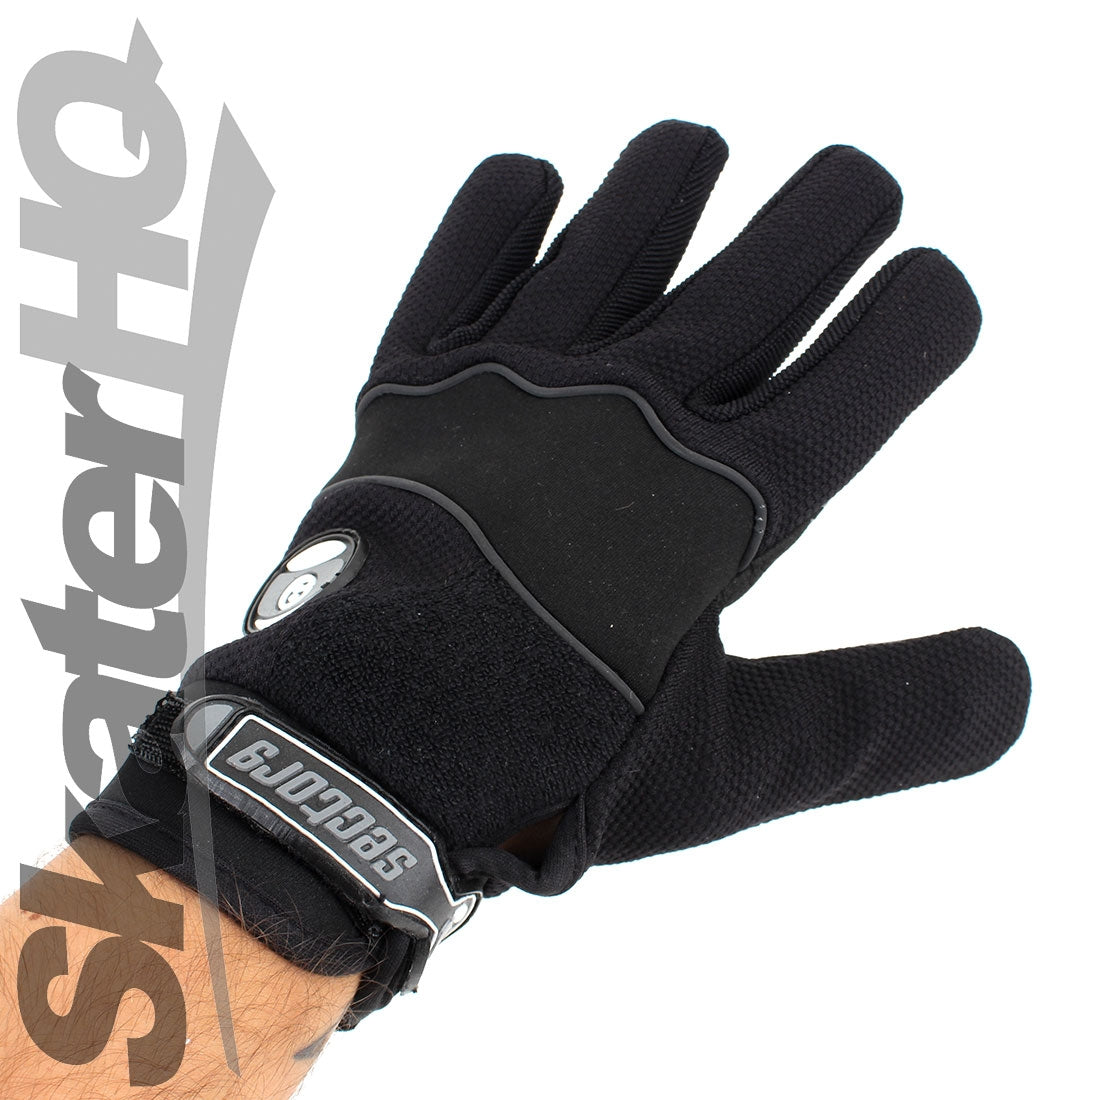 Sector 9 Apex Stealth Glove - L/XL Protective Gear